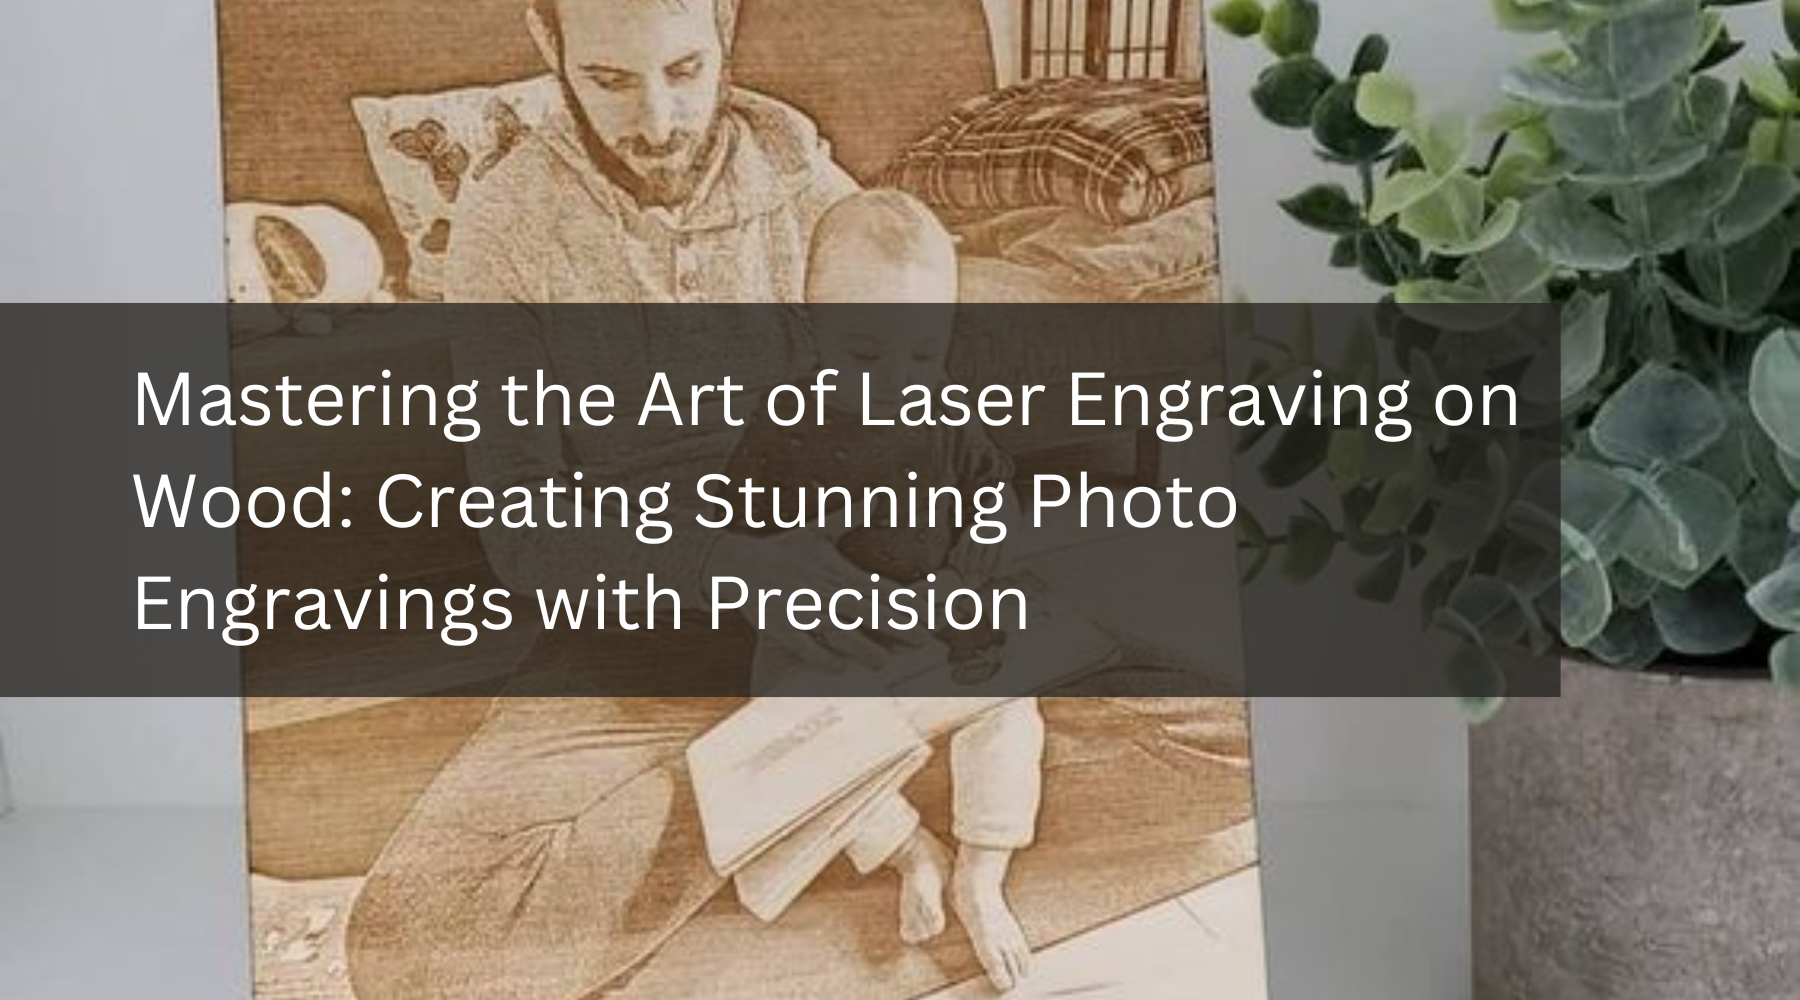 Mastering the Art of Laser Engraving on Wood: Creating Stunning Photo Engravings with Precision